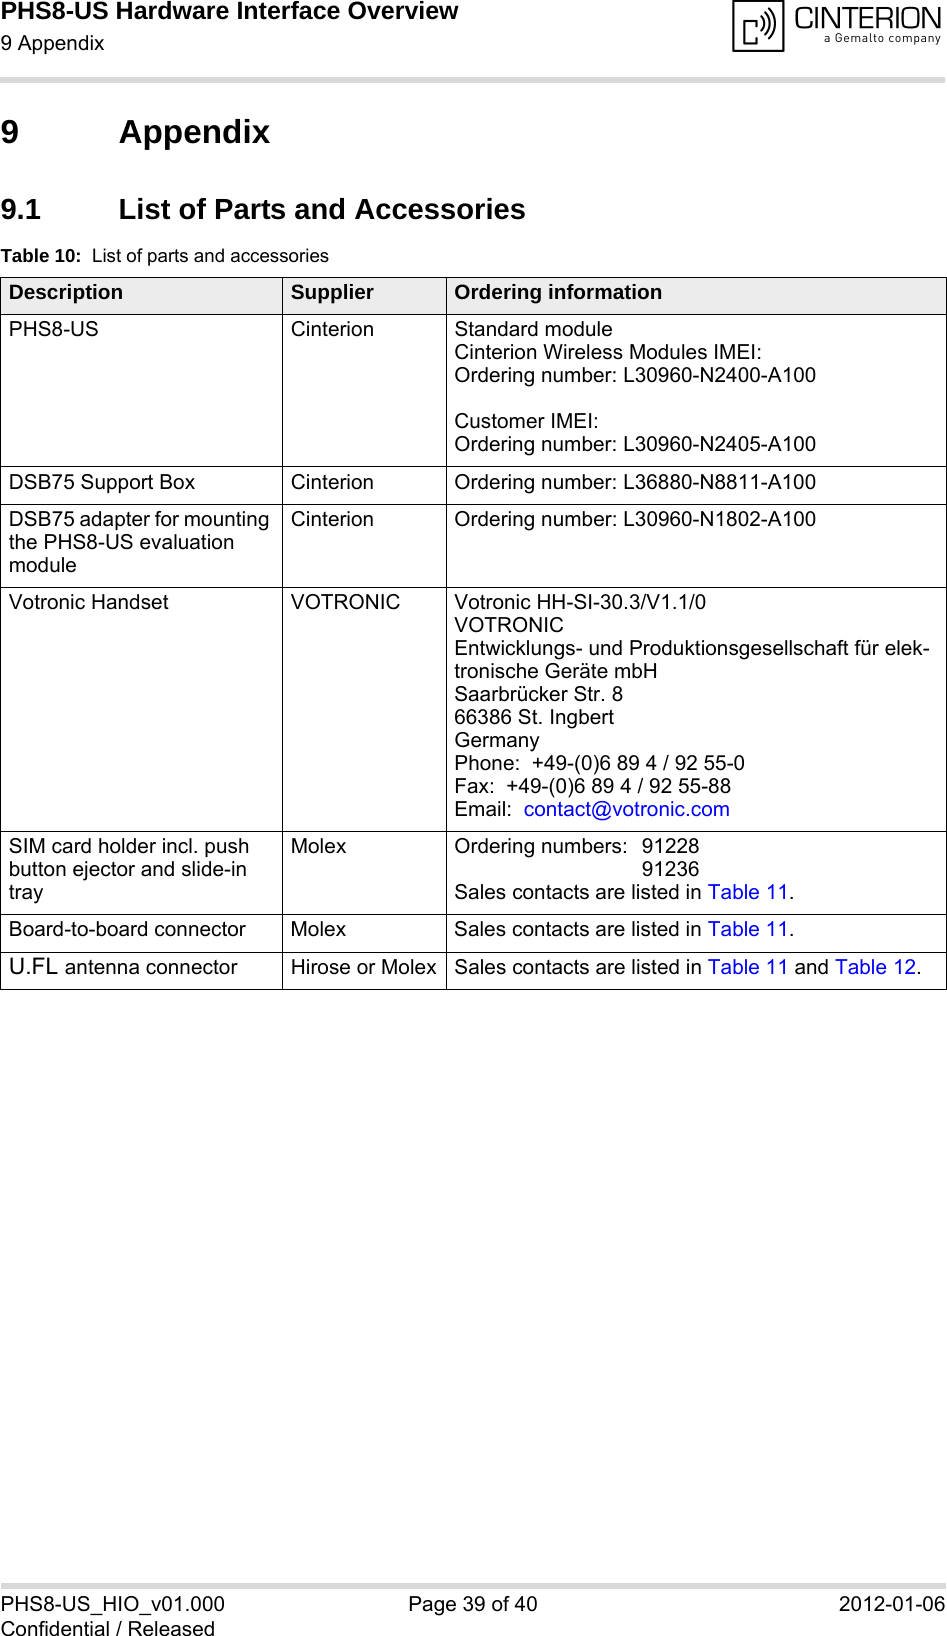 PHS8-US Hardware Interface Overview9 Appendix40PHS8-US_HIO_v01.000 Page 39 of 40 2012-01-06Confidential / Released9 Appendix9.1 List of Parts and AccessoriesTable 10:  List of parts and accessoriesDescription Supplier Ordering informationPHS8-US Cinterion Standard module Cinterion Wireless Modules IMEI:Ordering number: L30960-N2400-A100Customer IMEI:Ordering number: L30960-N2405-A100DSB75 Support Box Cinterion Ordering number: L36880-N8811-A100DSB75 adapter for mounting the PHS8-US evaluation moduleCinterion Ordering number: L30960-N1802-A100Votronic Handset VOTRONIC Votronic HH-SI-30.3/V1.1/0VOTRONIC Entwicklungs- und Produktionsgesellschaft für elek-tronische Geräte mbHSaarbrücker Str. 866386 St. IngbertGermanyPhone:  +49-(0)6 89 4 / 92 55-0Fax:  +49-(0)6 89 4 / 92 55-88Email:  contact@votronic.comSIM card holder incl. push button ejector and slide-in trayMolex Ordering numbers:  91228 91236Sales contacts are listed in Table 11.Board-to-board connector Molex Sales contacts are listed in Table 11.U.FL antenna connector Hirose or Molex Sales contacts are listed in Table 11 and Table 12.